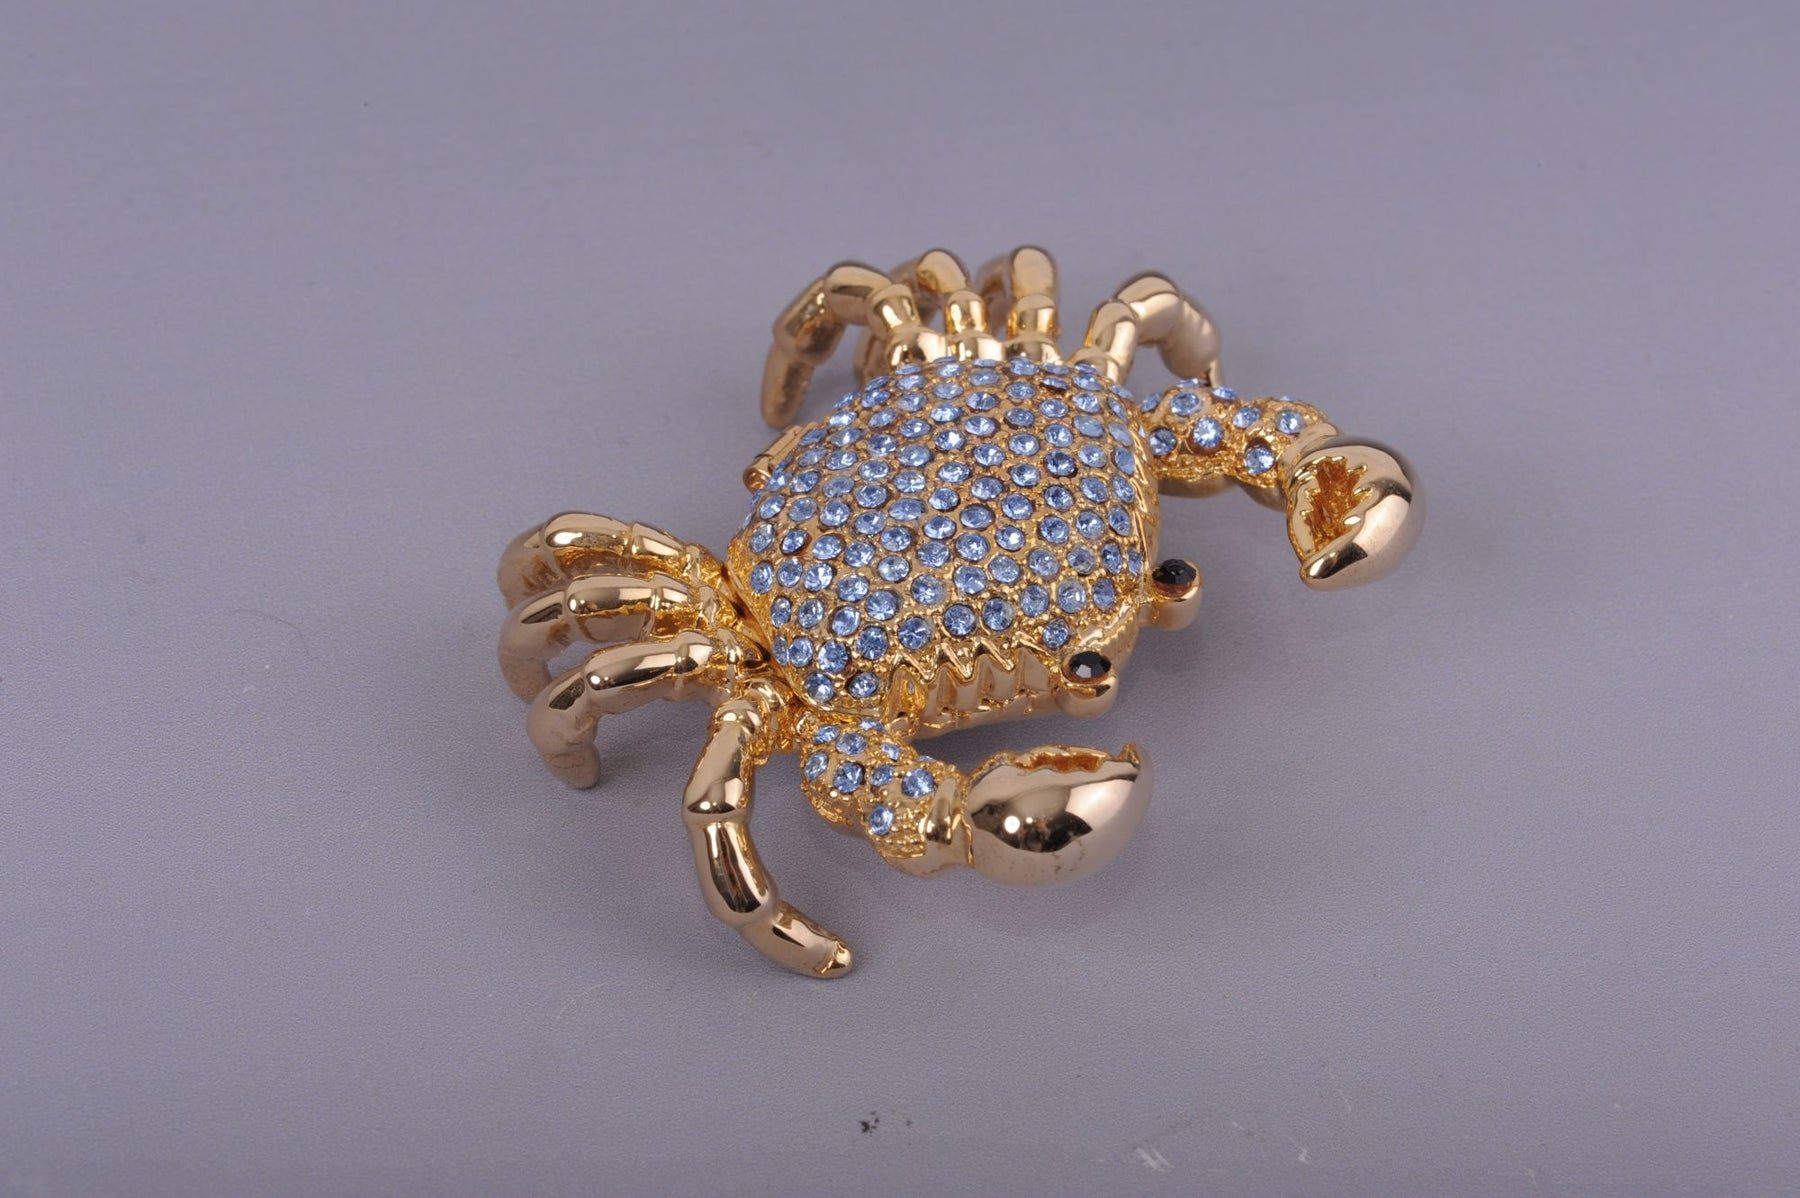 Golden Crab with blue stones